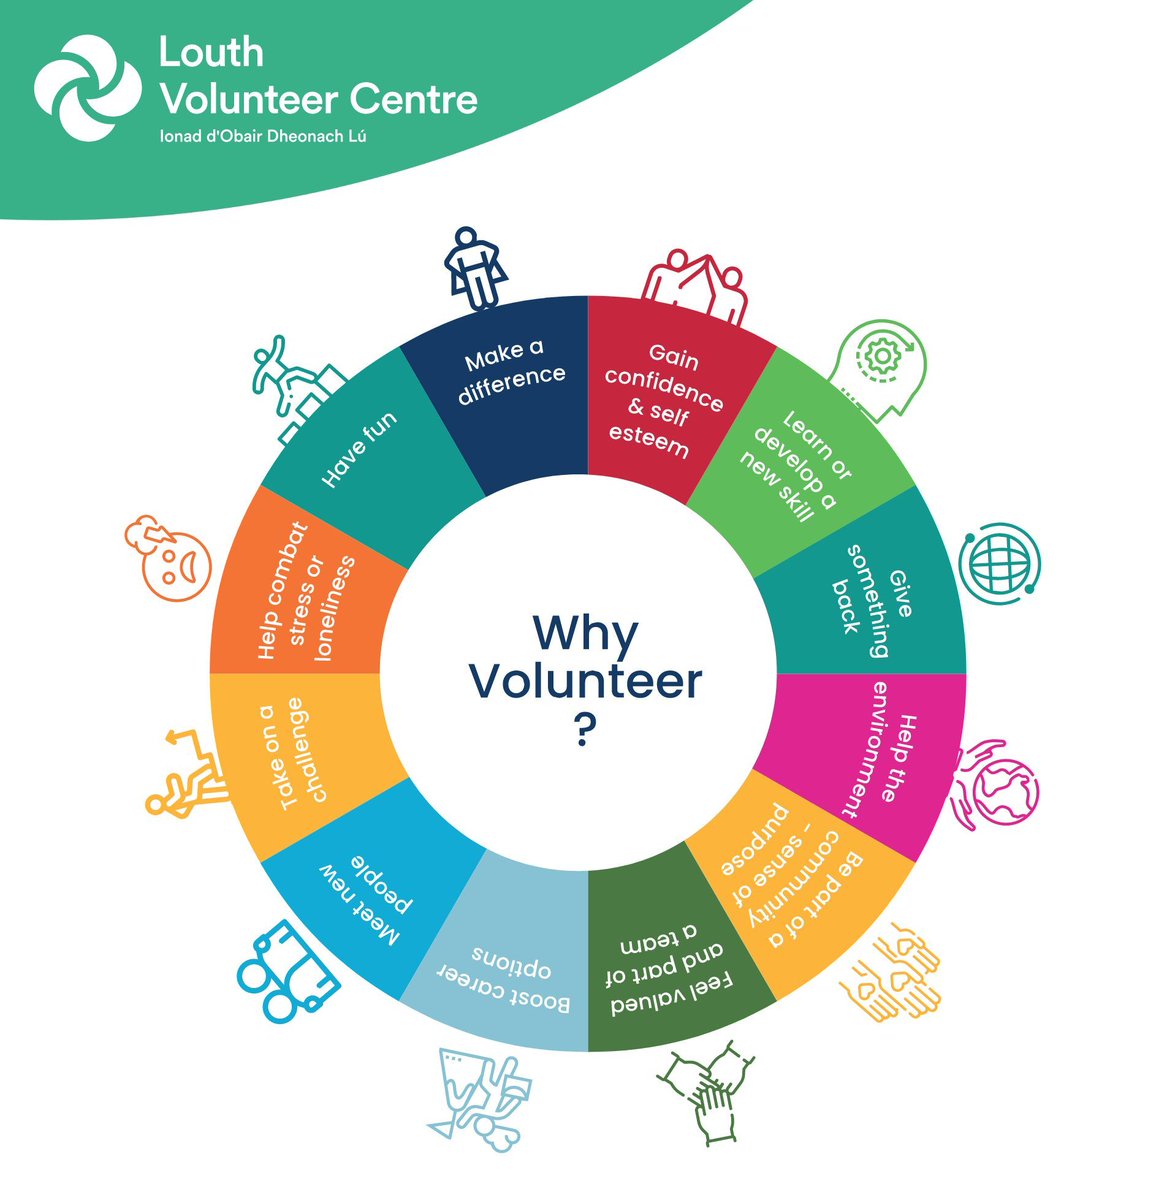 There are so many benefits to volunteering, See the wheel below outlining some of the many benefits of volunteering. Get involved in the County Louth Volunteering Framework by completing our survey and have your say about the future of volunteering. buff.ly/3J2JT0p